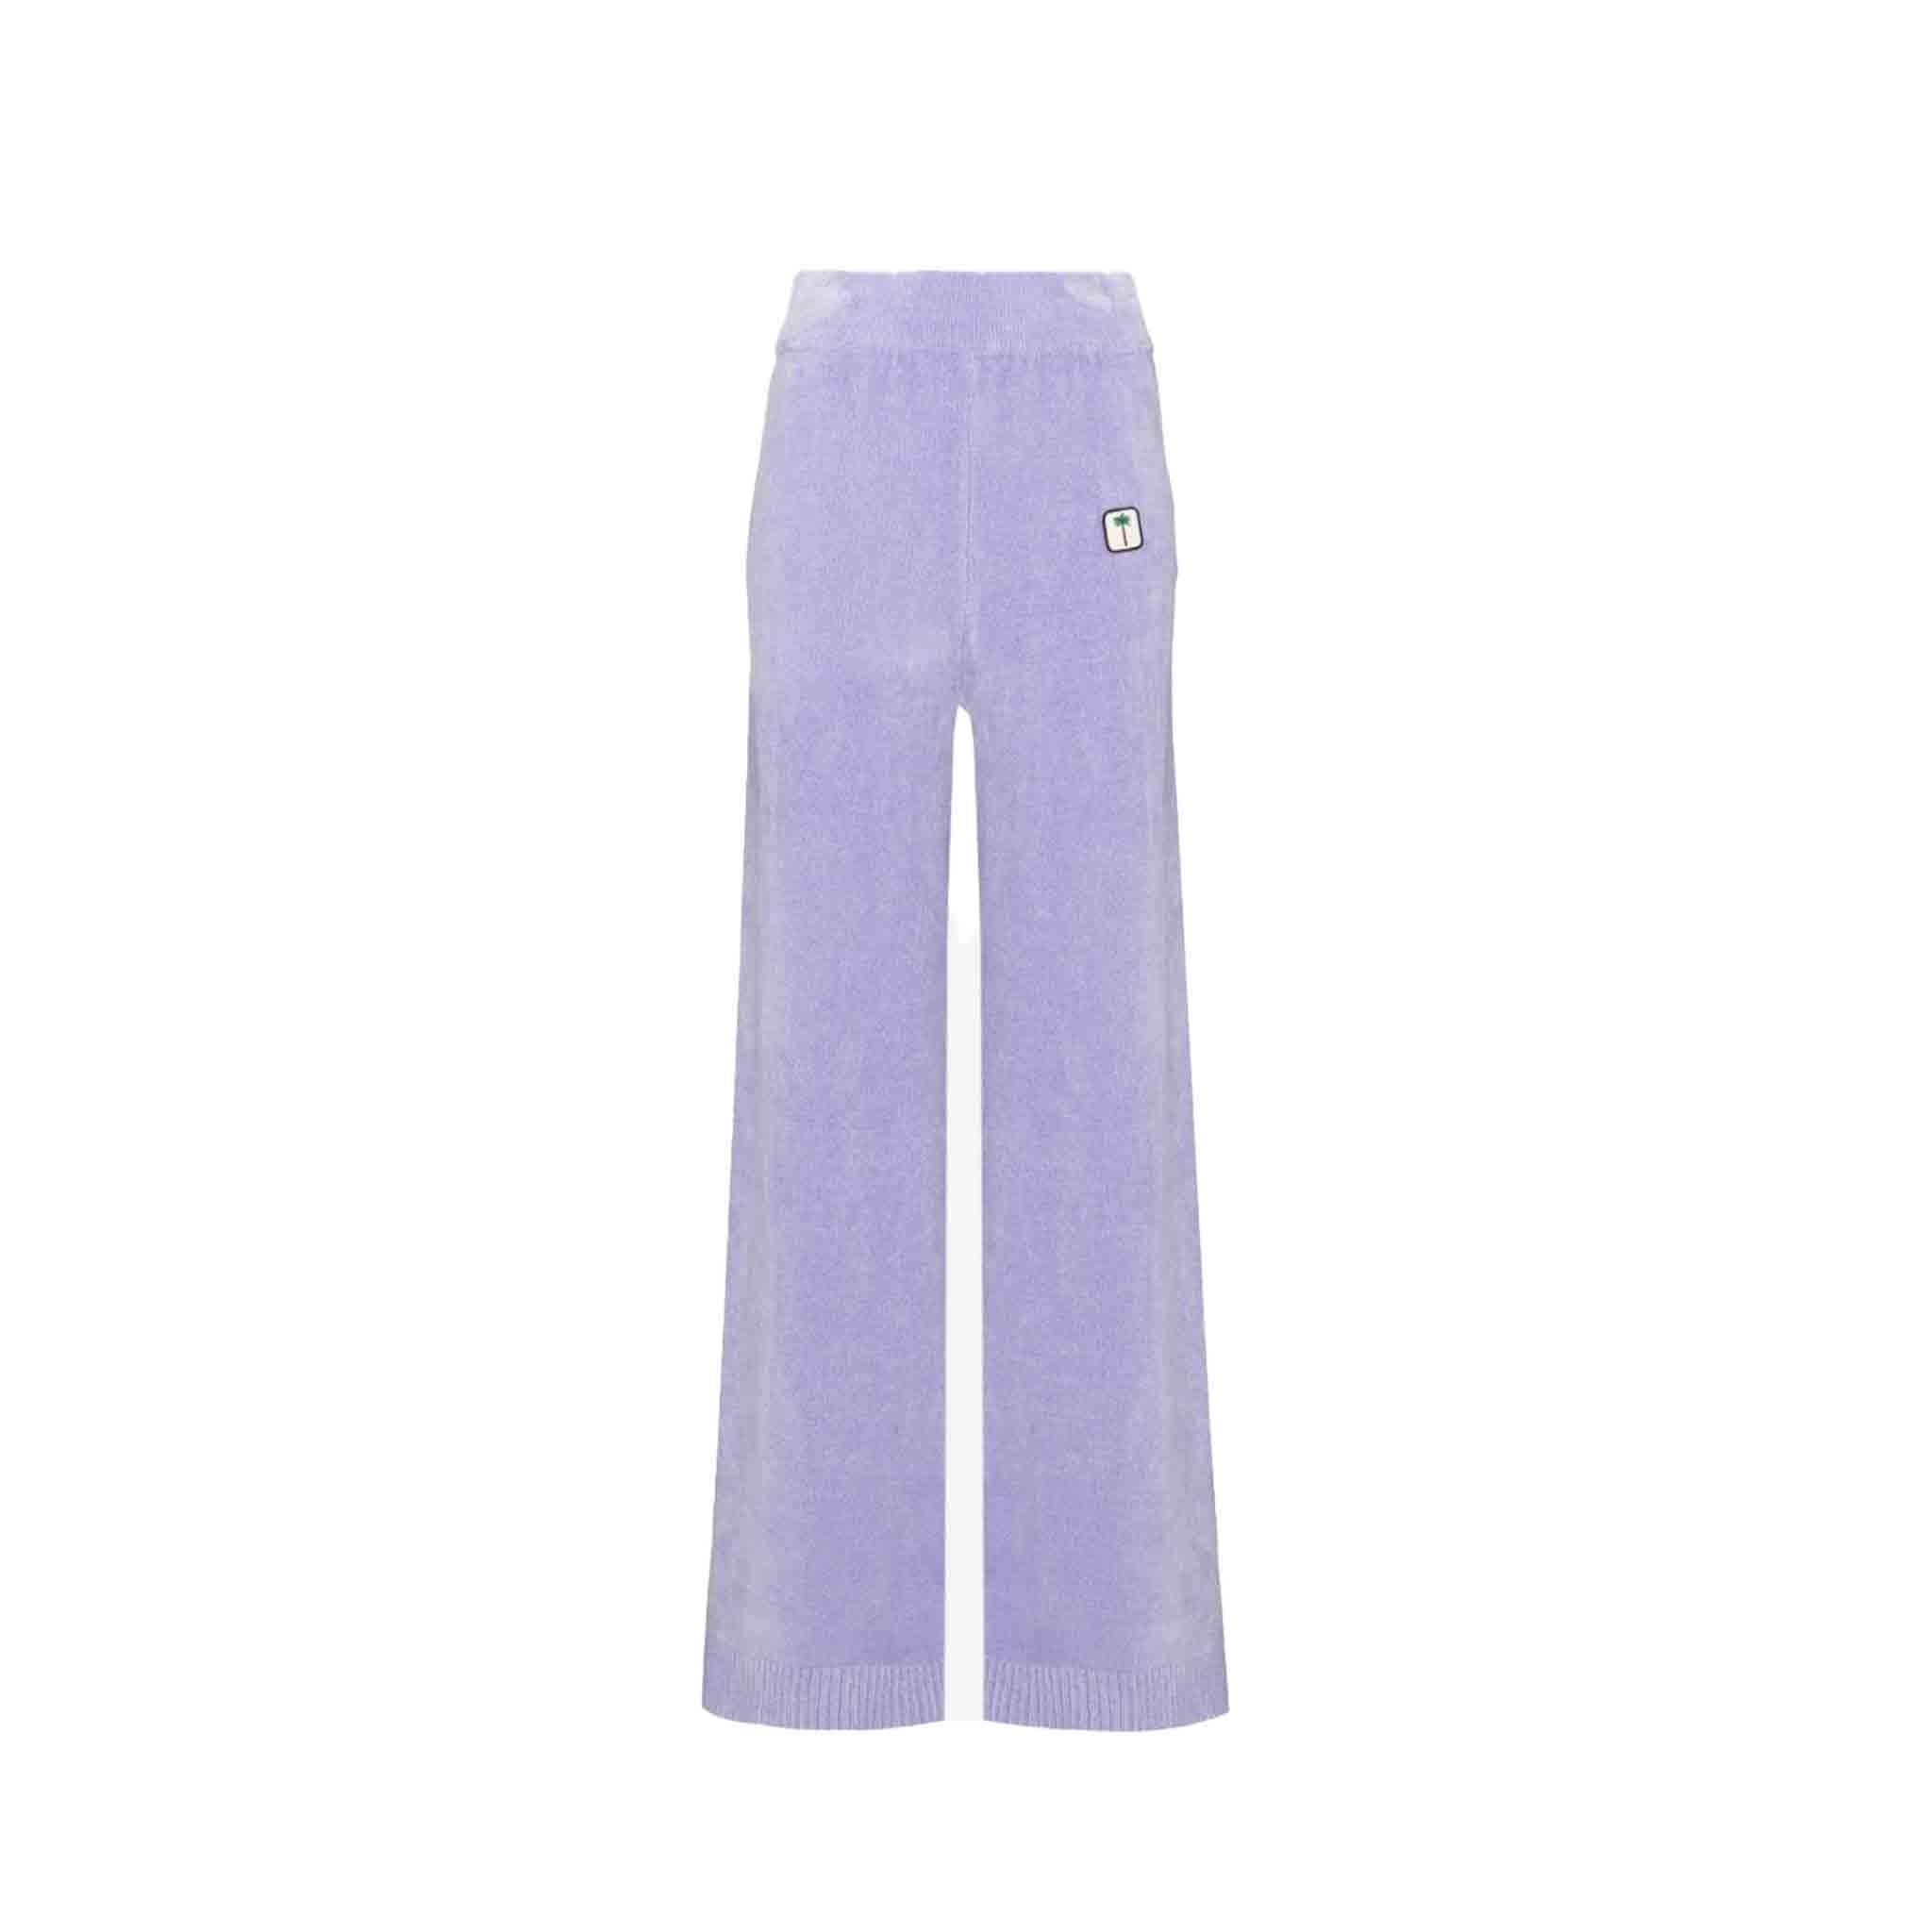 Get ready to elevate your casual style with these Palm Angels track pants. Made from a soft chenille fabric in a beautiful lilac shade, these pants are sure to become a go-to in your wardrobe. The elasticated waistband and wide leg silhouette provide a comfortable fit, while the logo patch to the side adds a touch of branding. Made from a blend of polyester, viscose, and cotton, these pants are both stylish and comfortable.